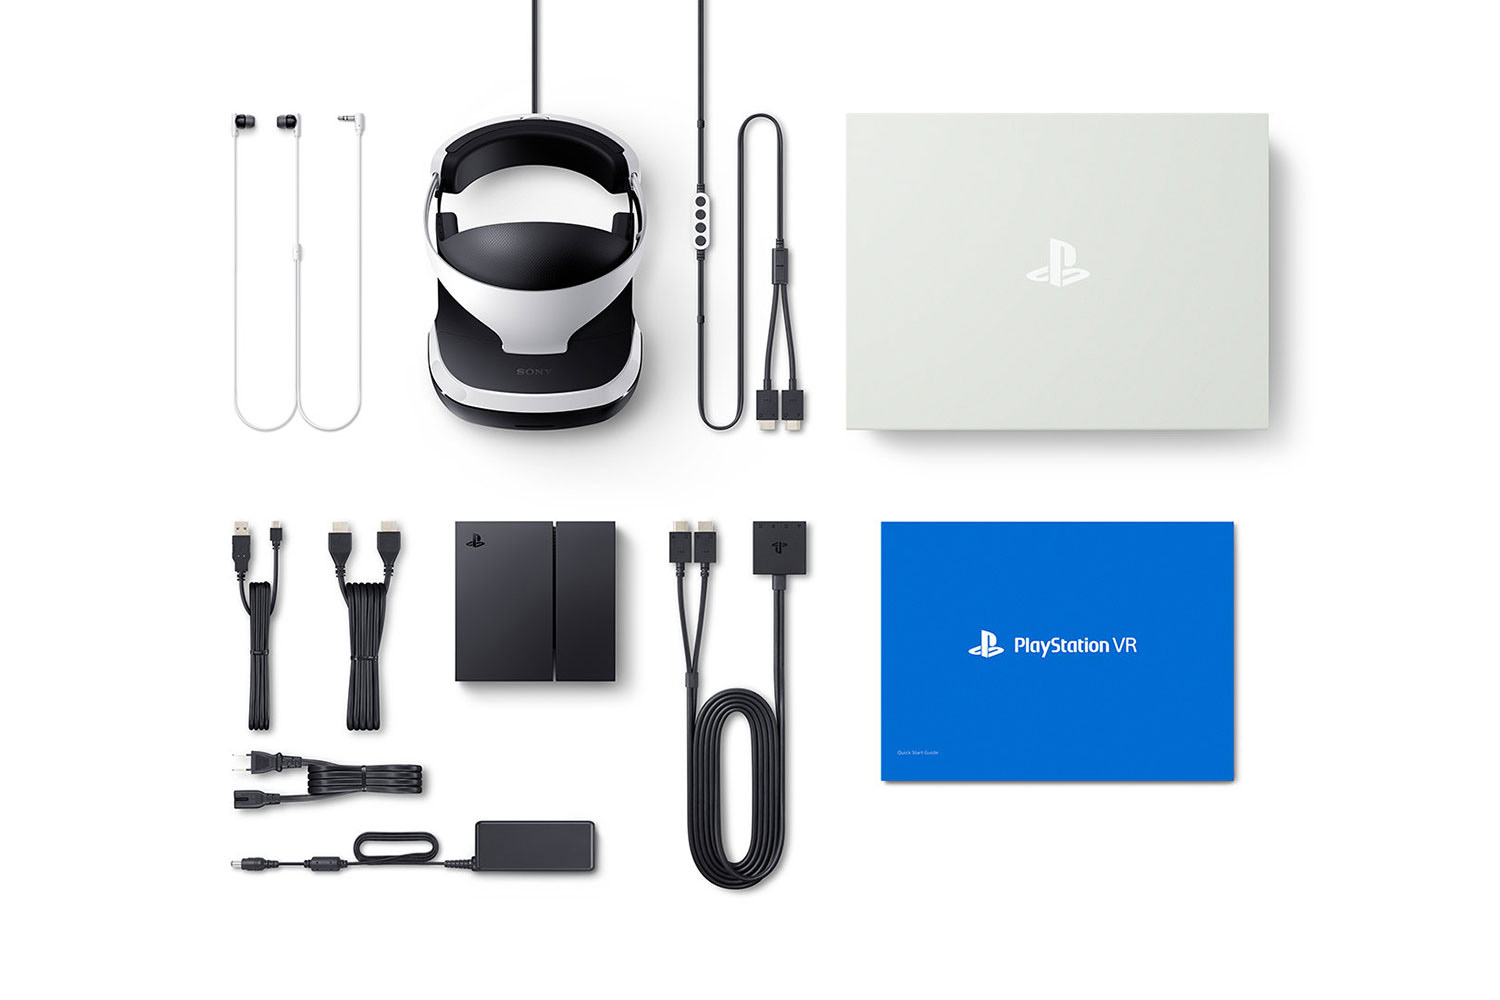 Every component that comes with the PS VR laid out on a table.